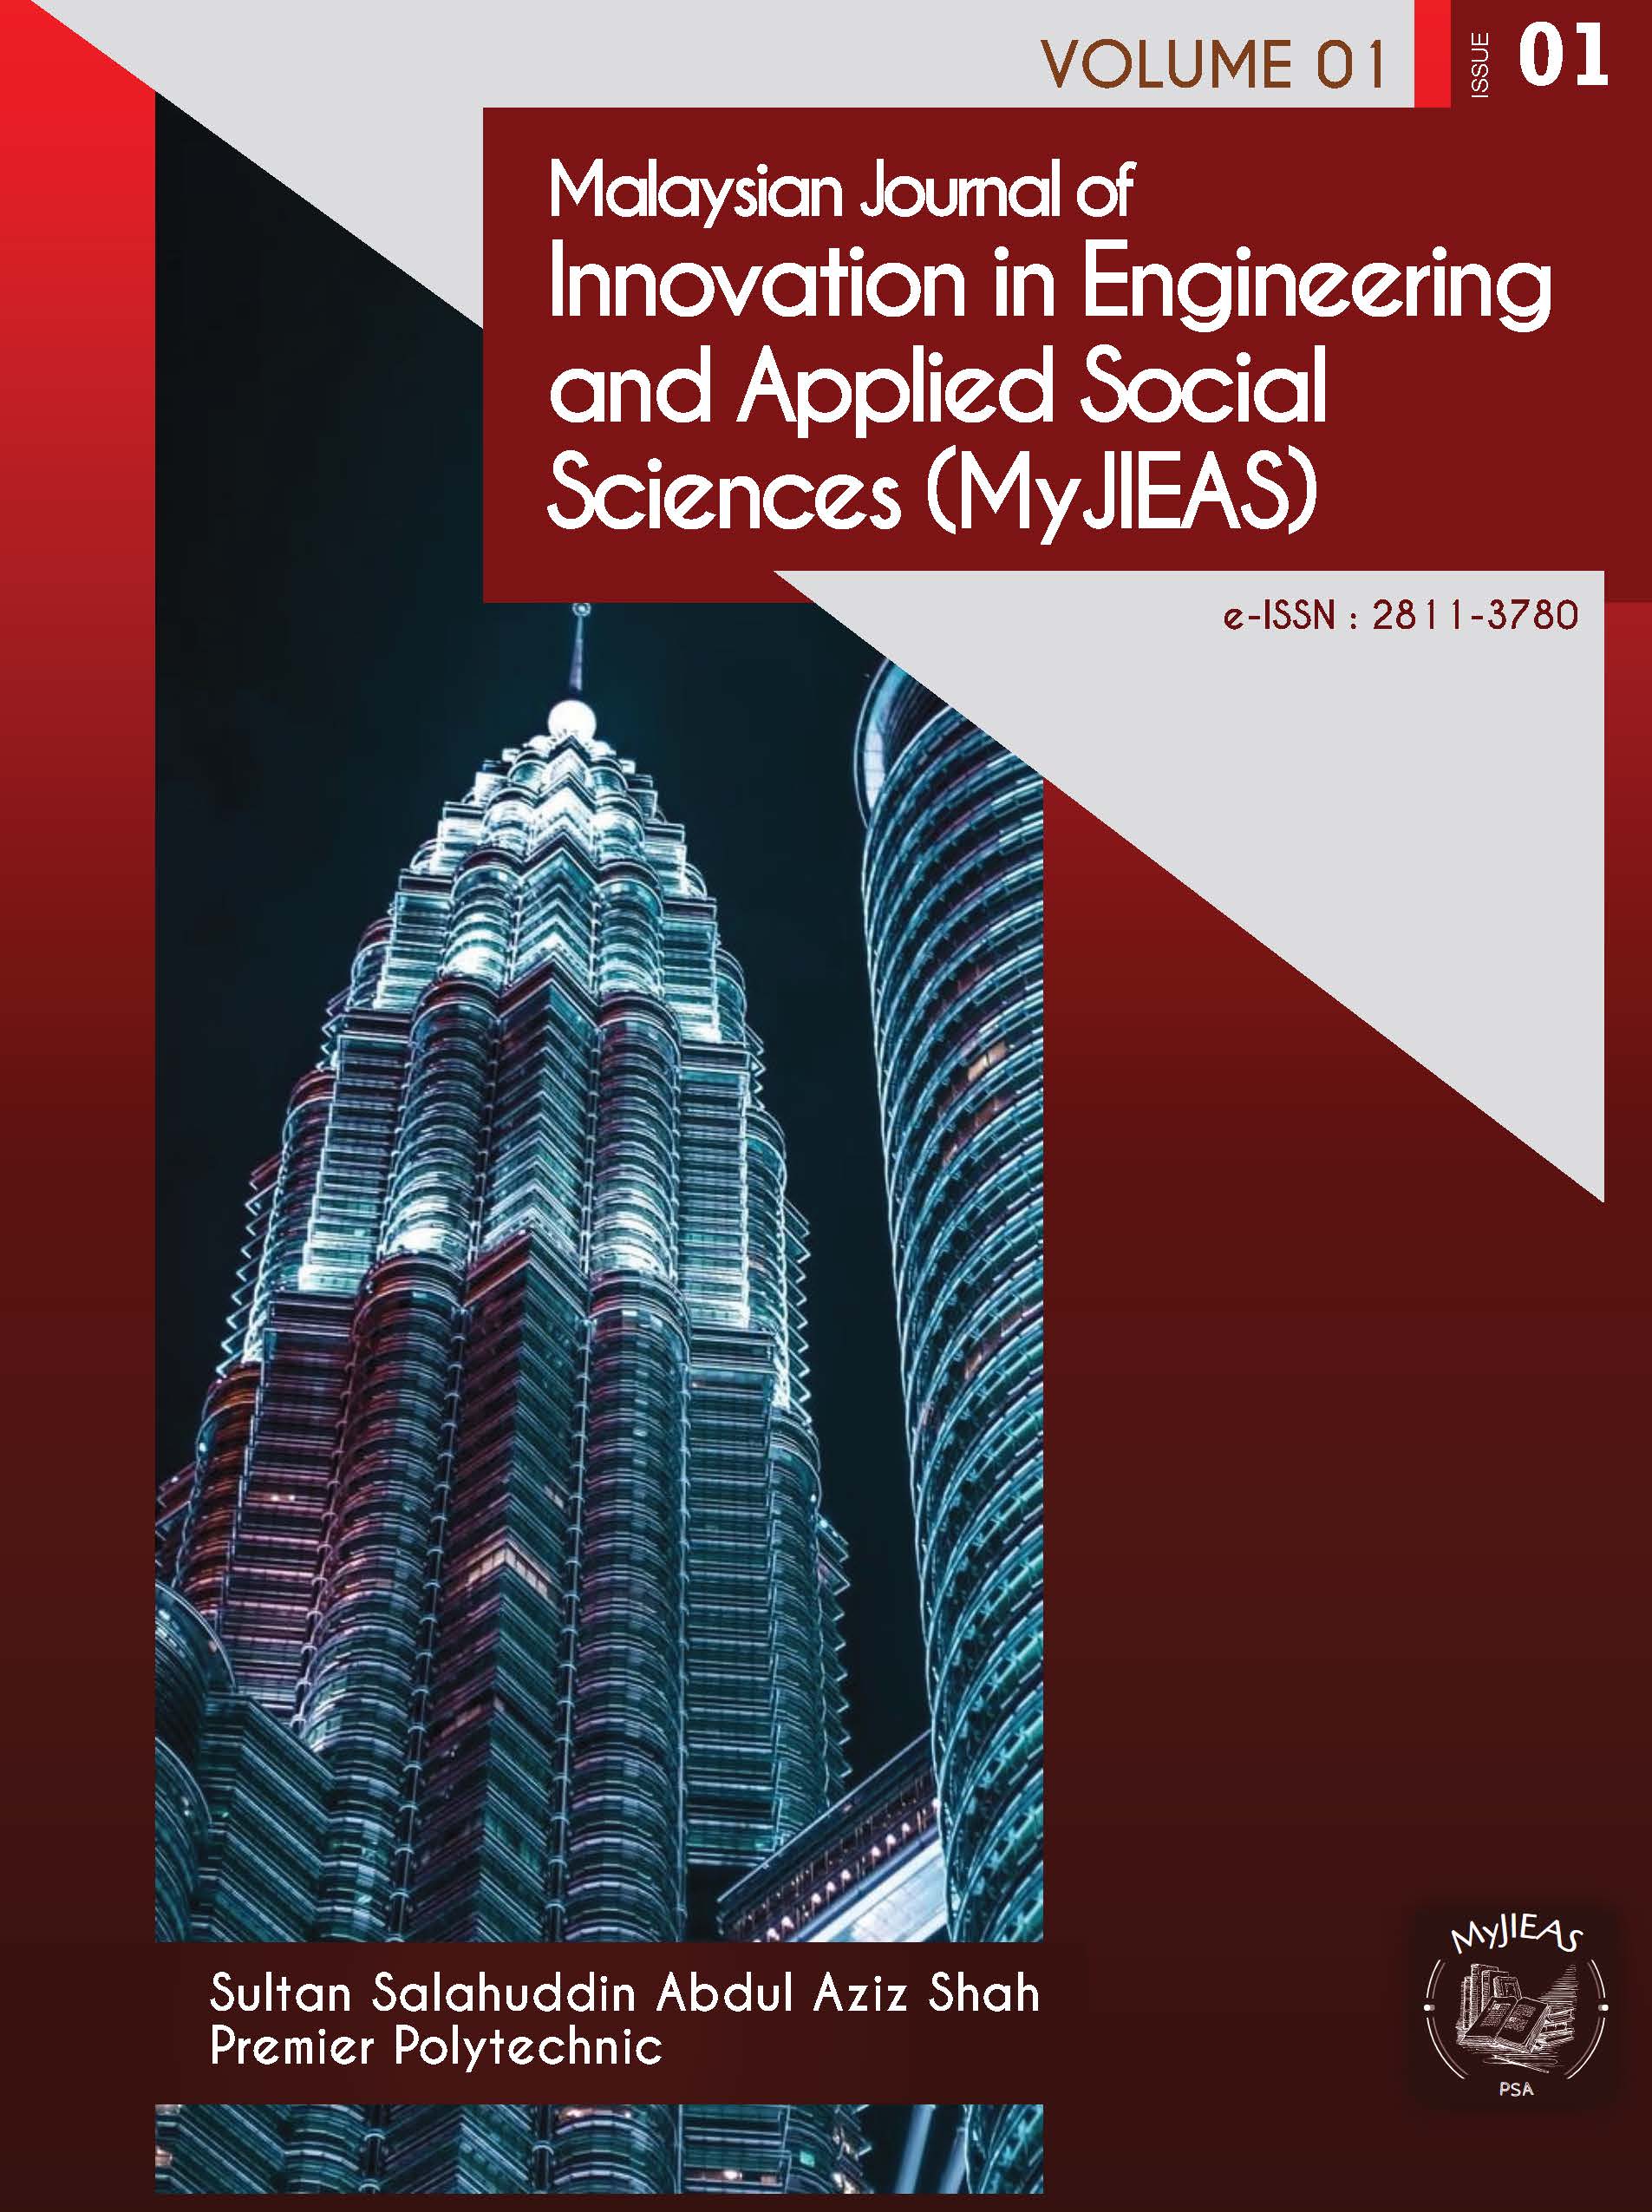 					View Vol. 1 No. 01 (2021): MALAYSIAN JOURNAL OF INNOVATION IN ENGINEERING AND APPLIED SOCIAL SCIENCES
				